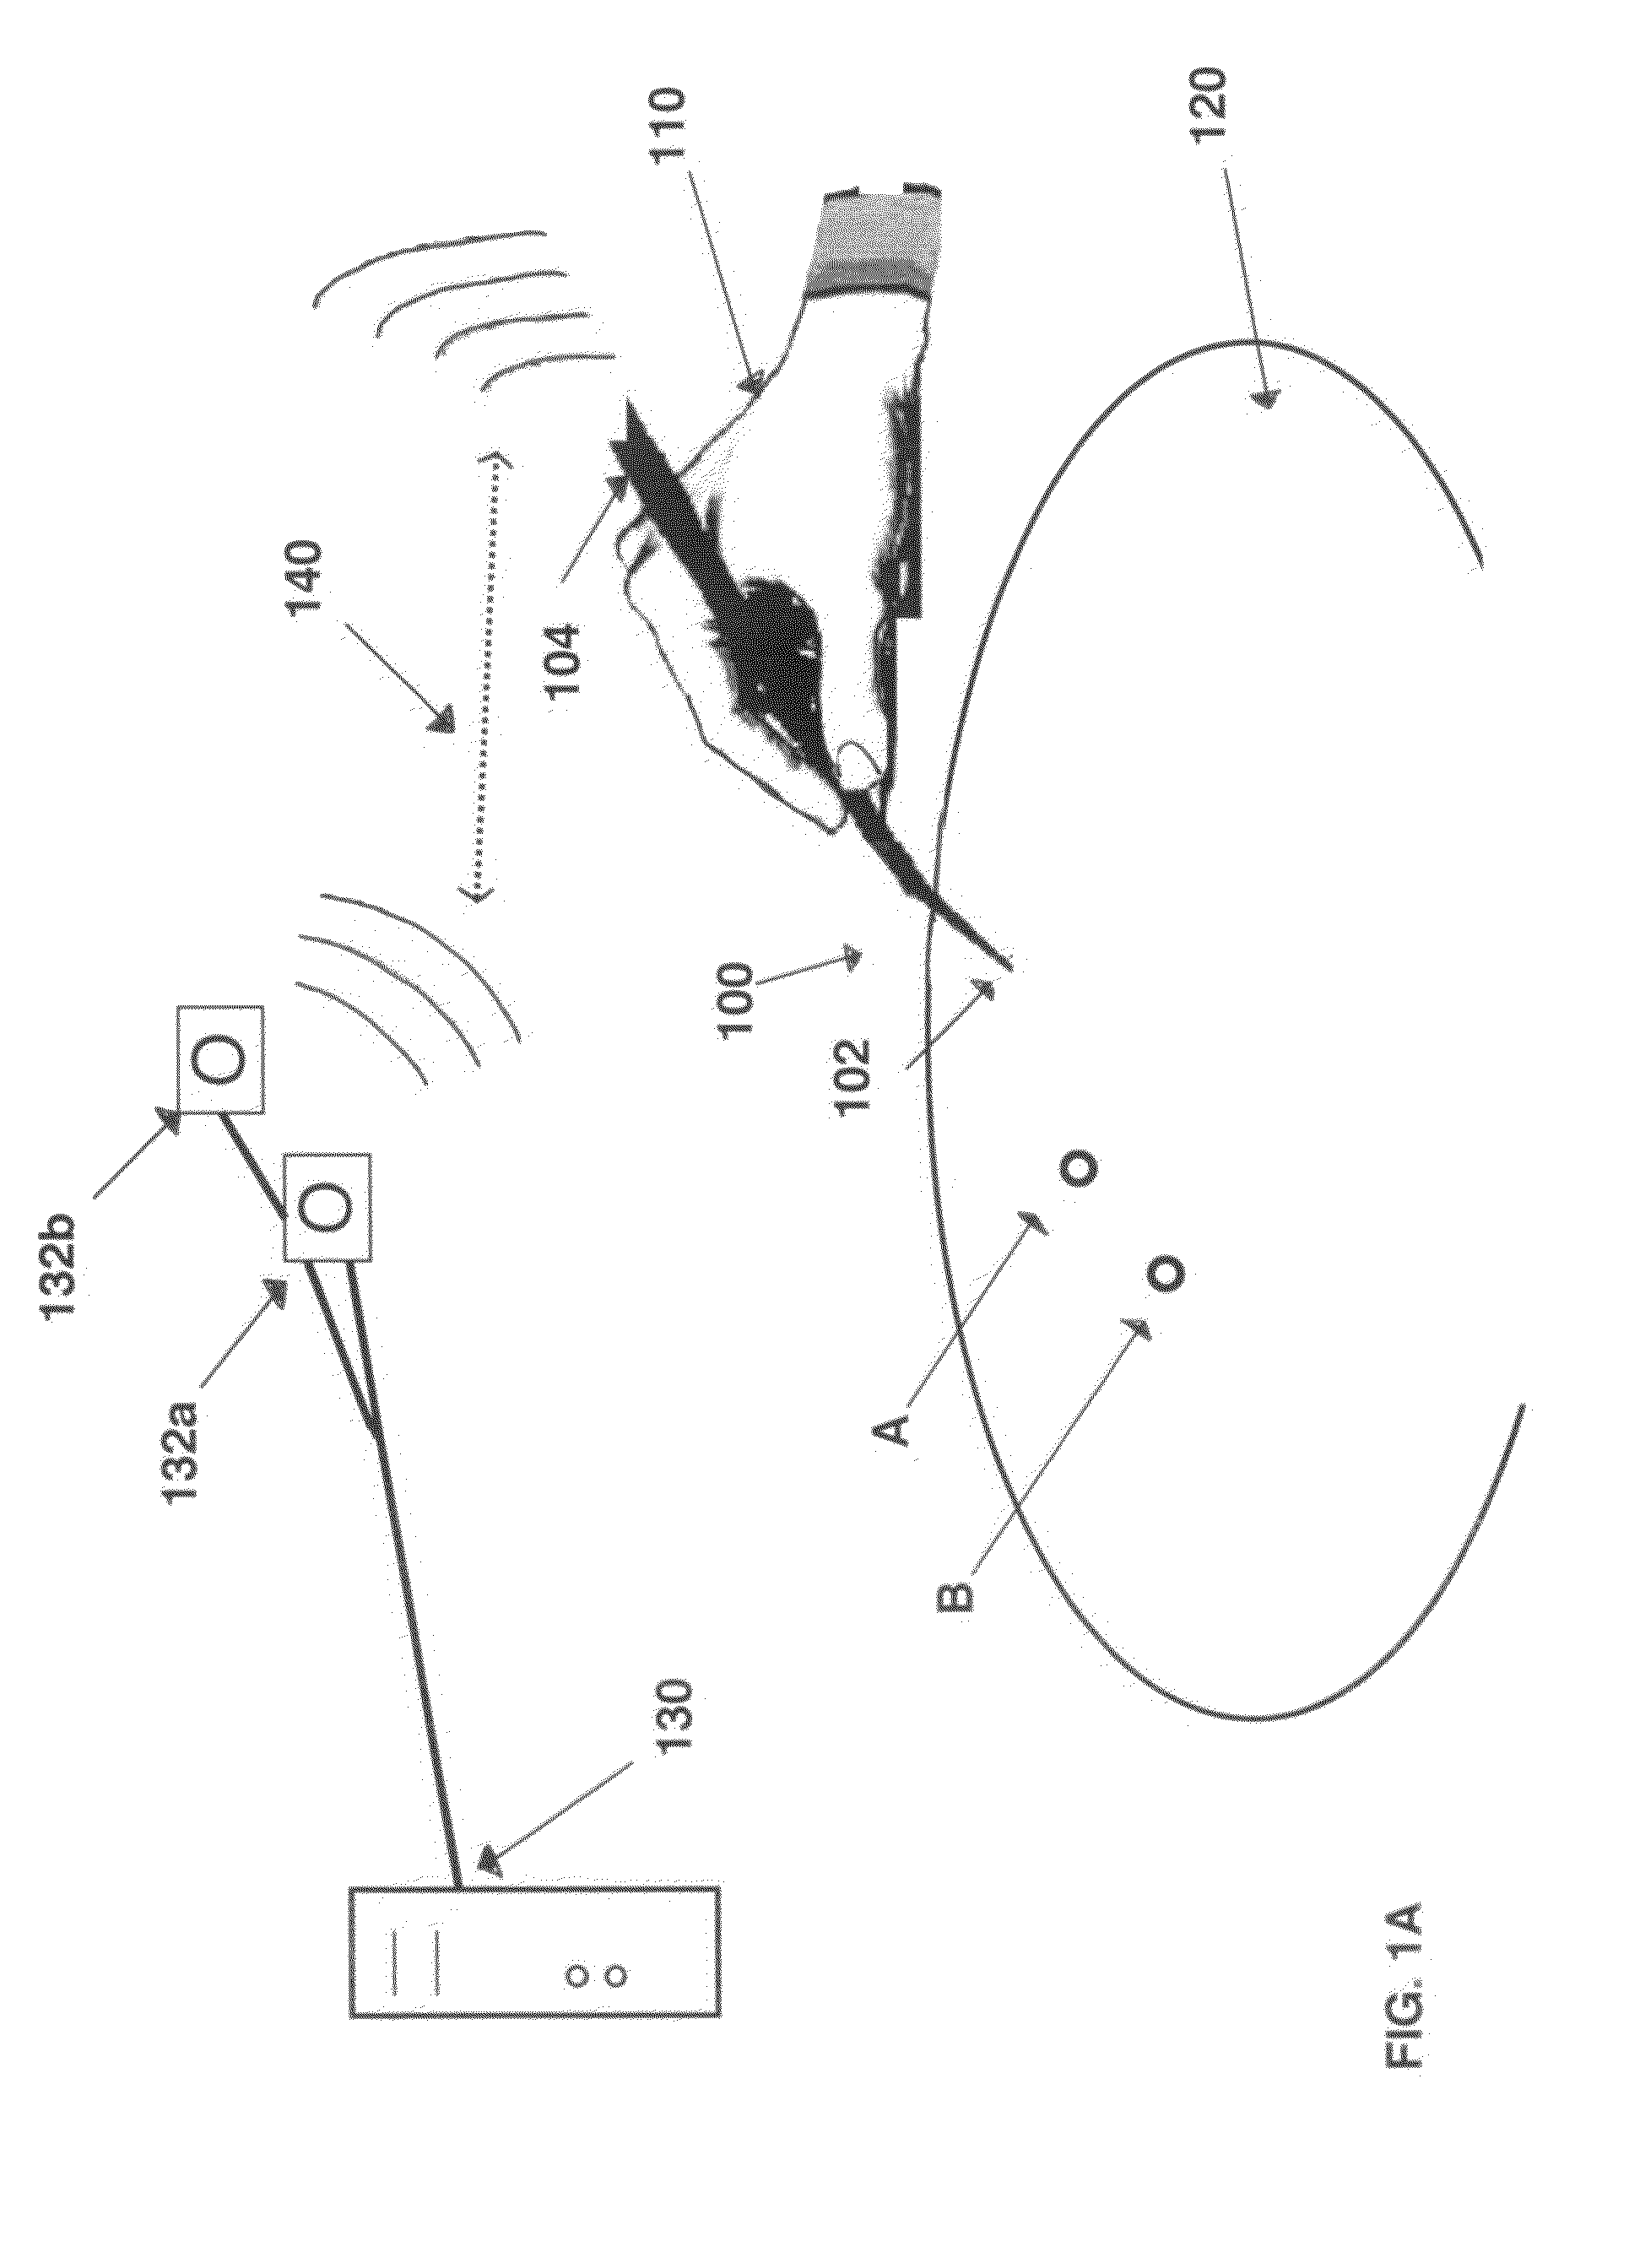 Device and method for measuring anatomic geometries